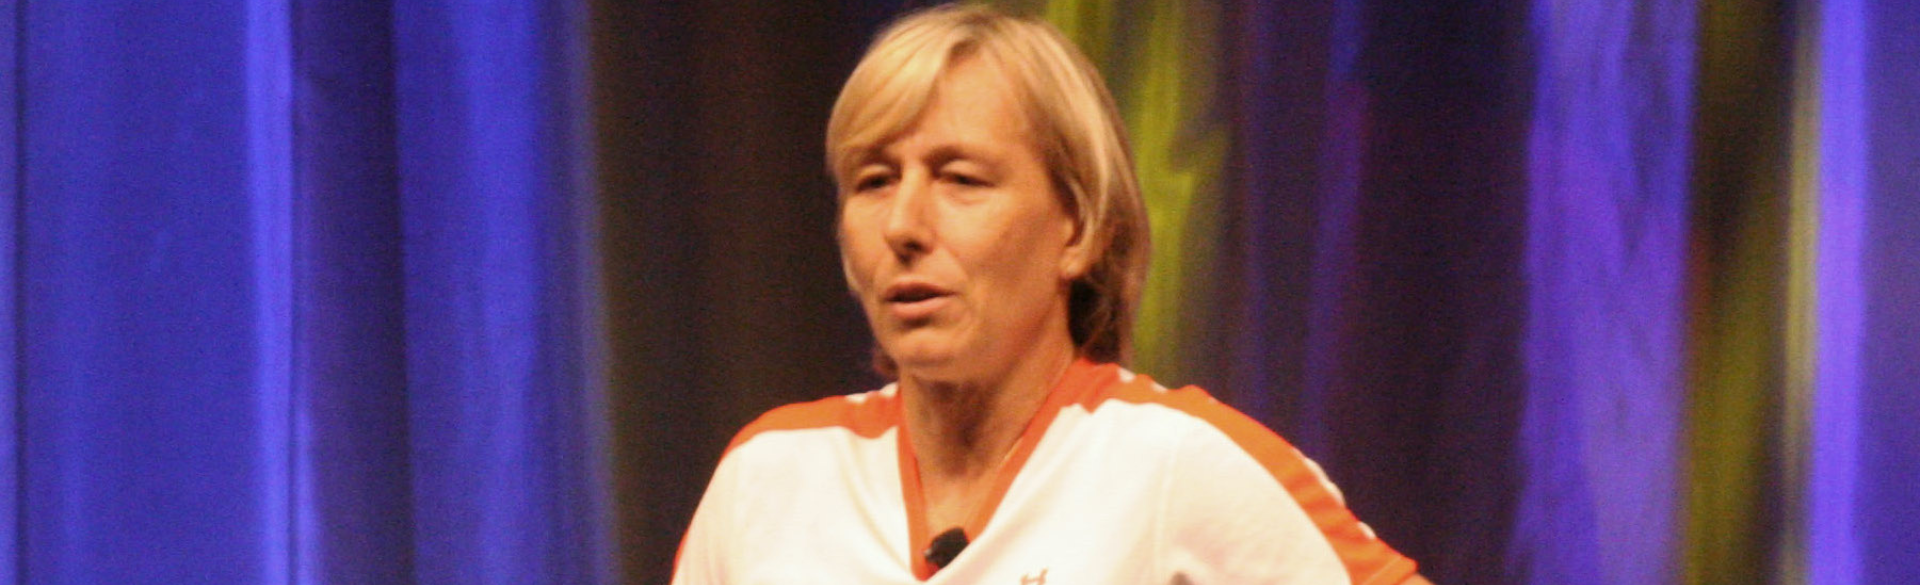 Martina Navratilova revealed that she has been diagnosed with two unrelated cancers: stage 1 throat cancer and early-stage breast cancer.